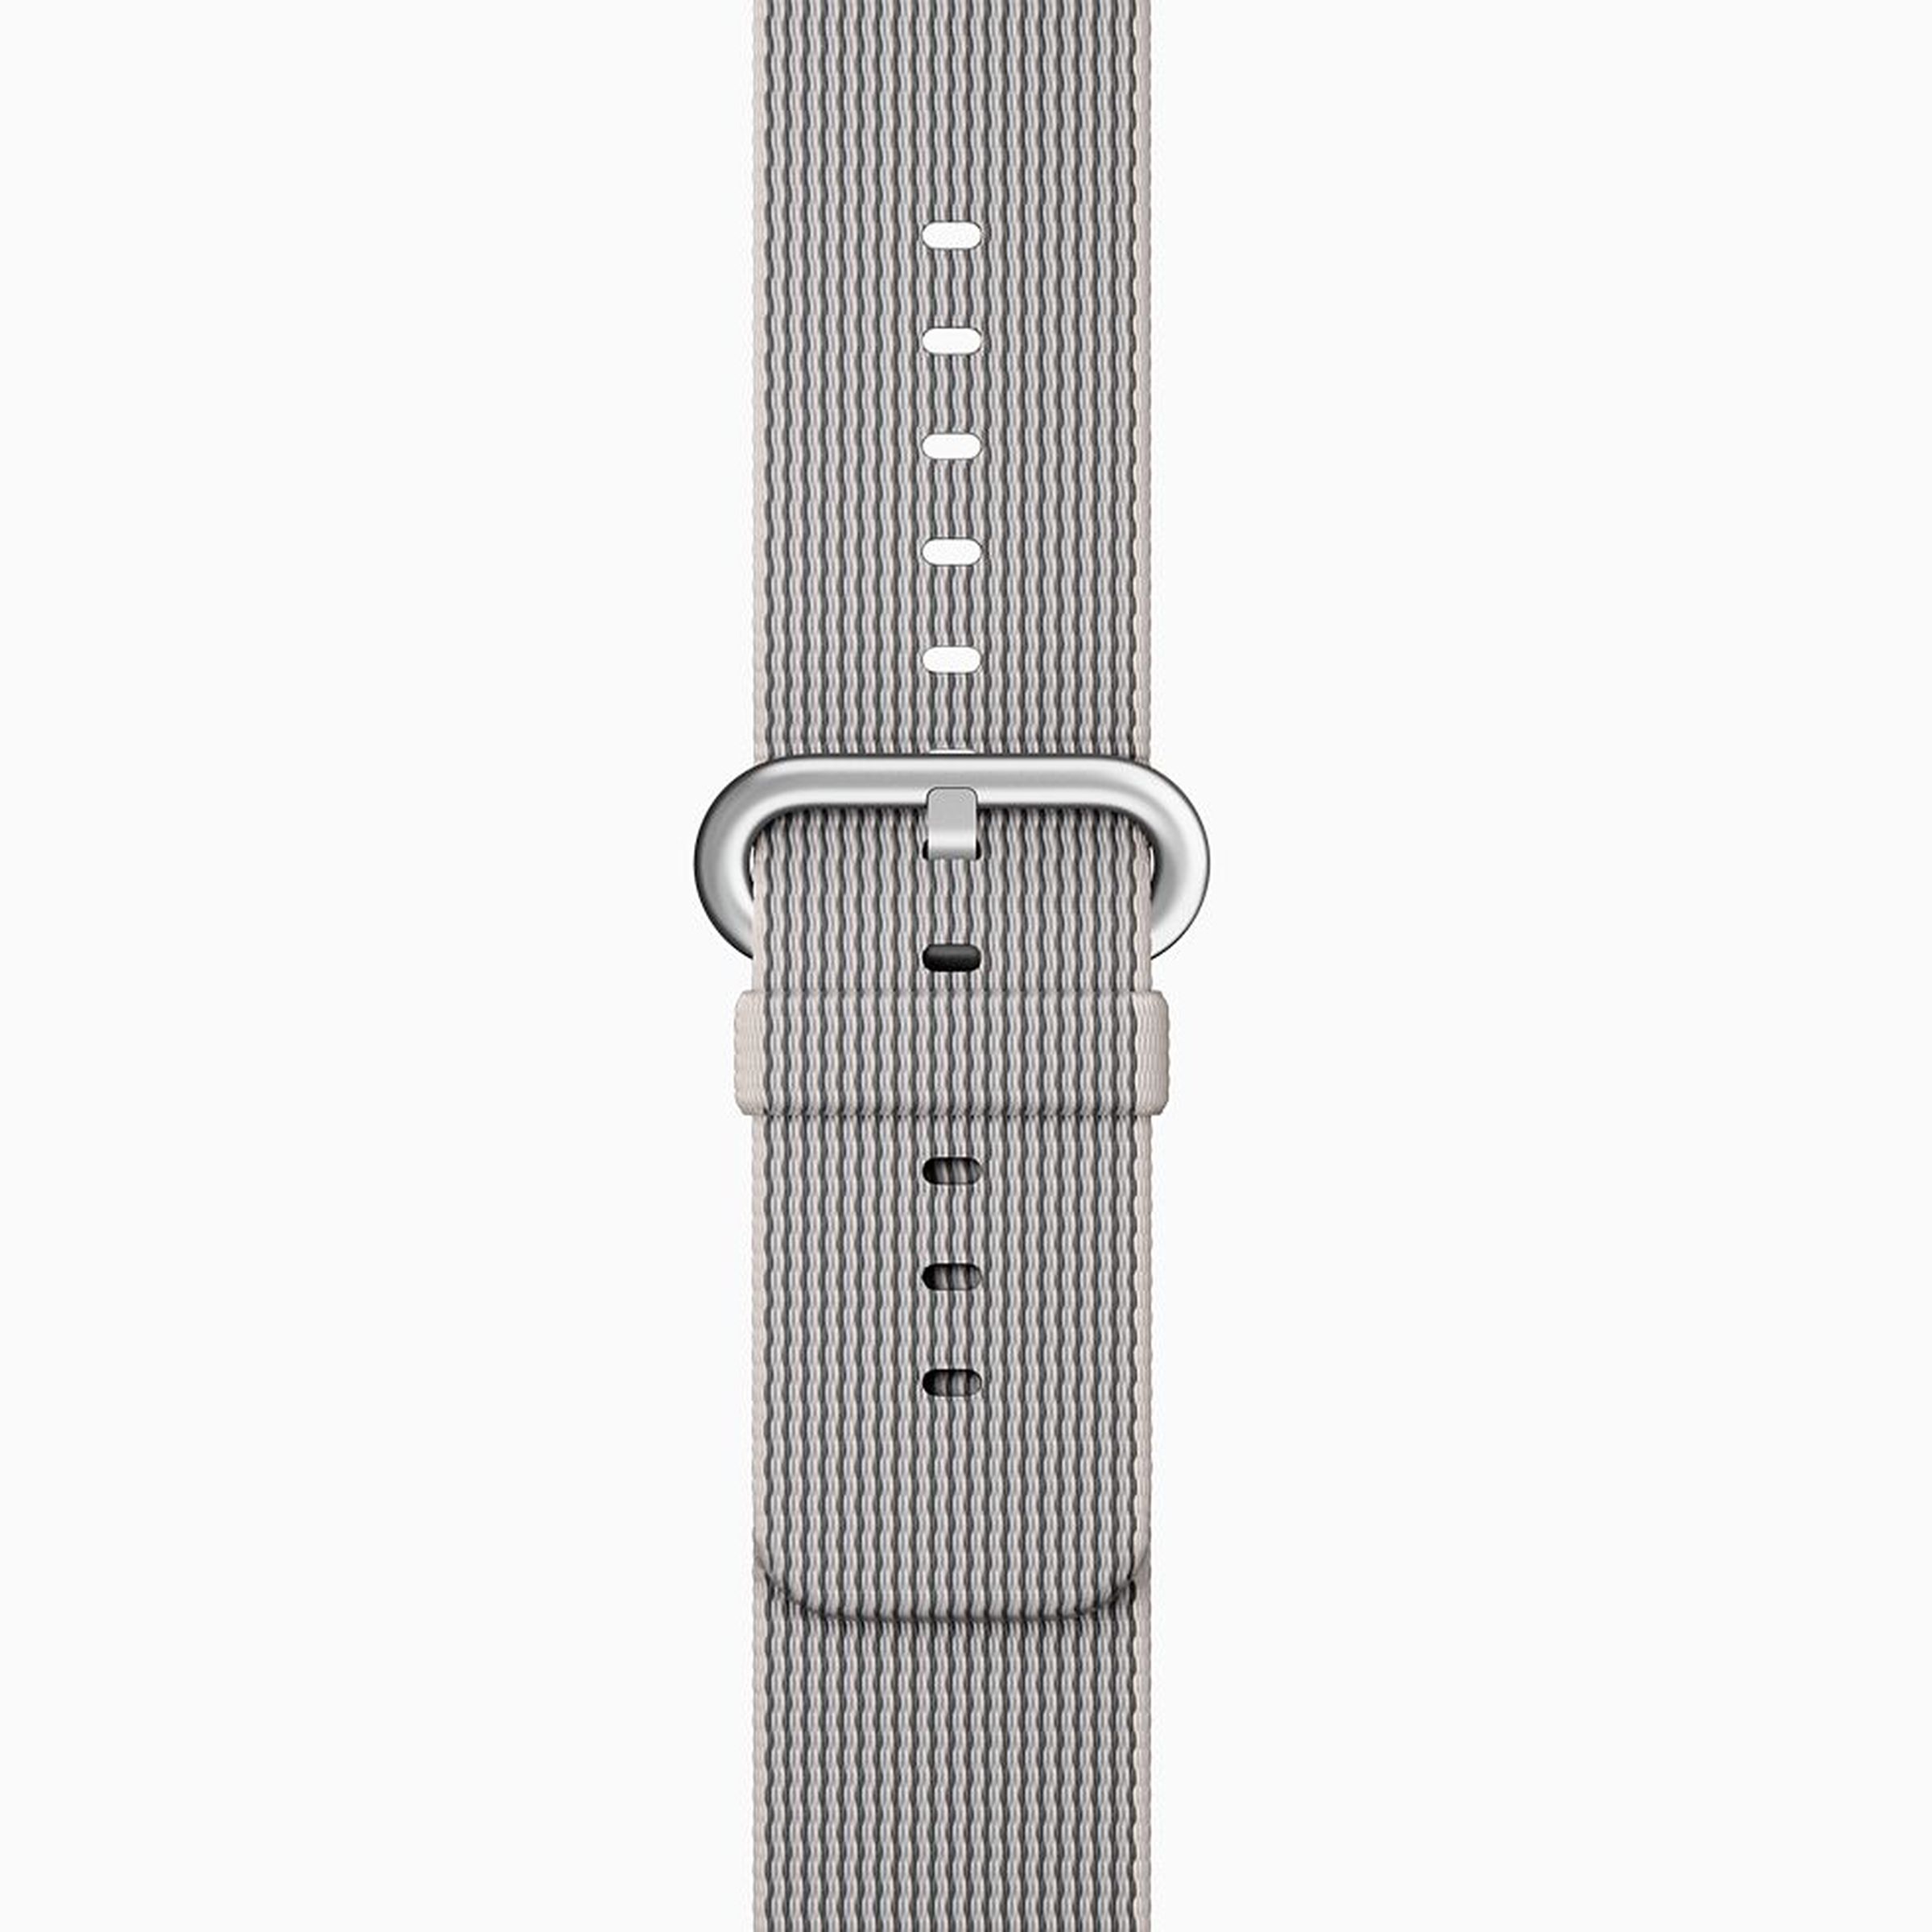 New Apple Watch bands hands-on photos